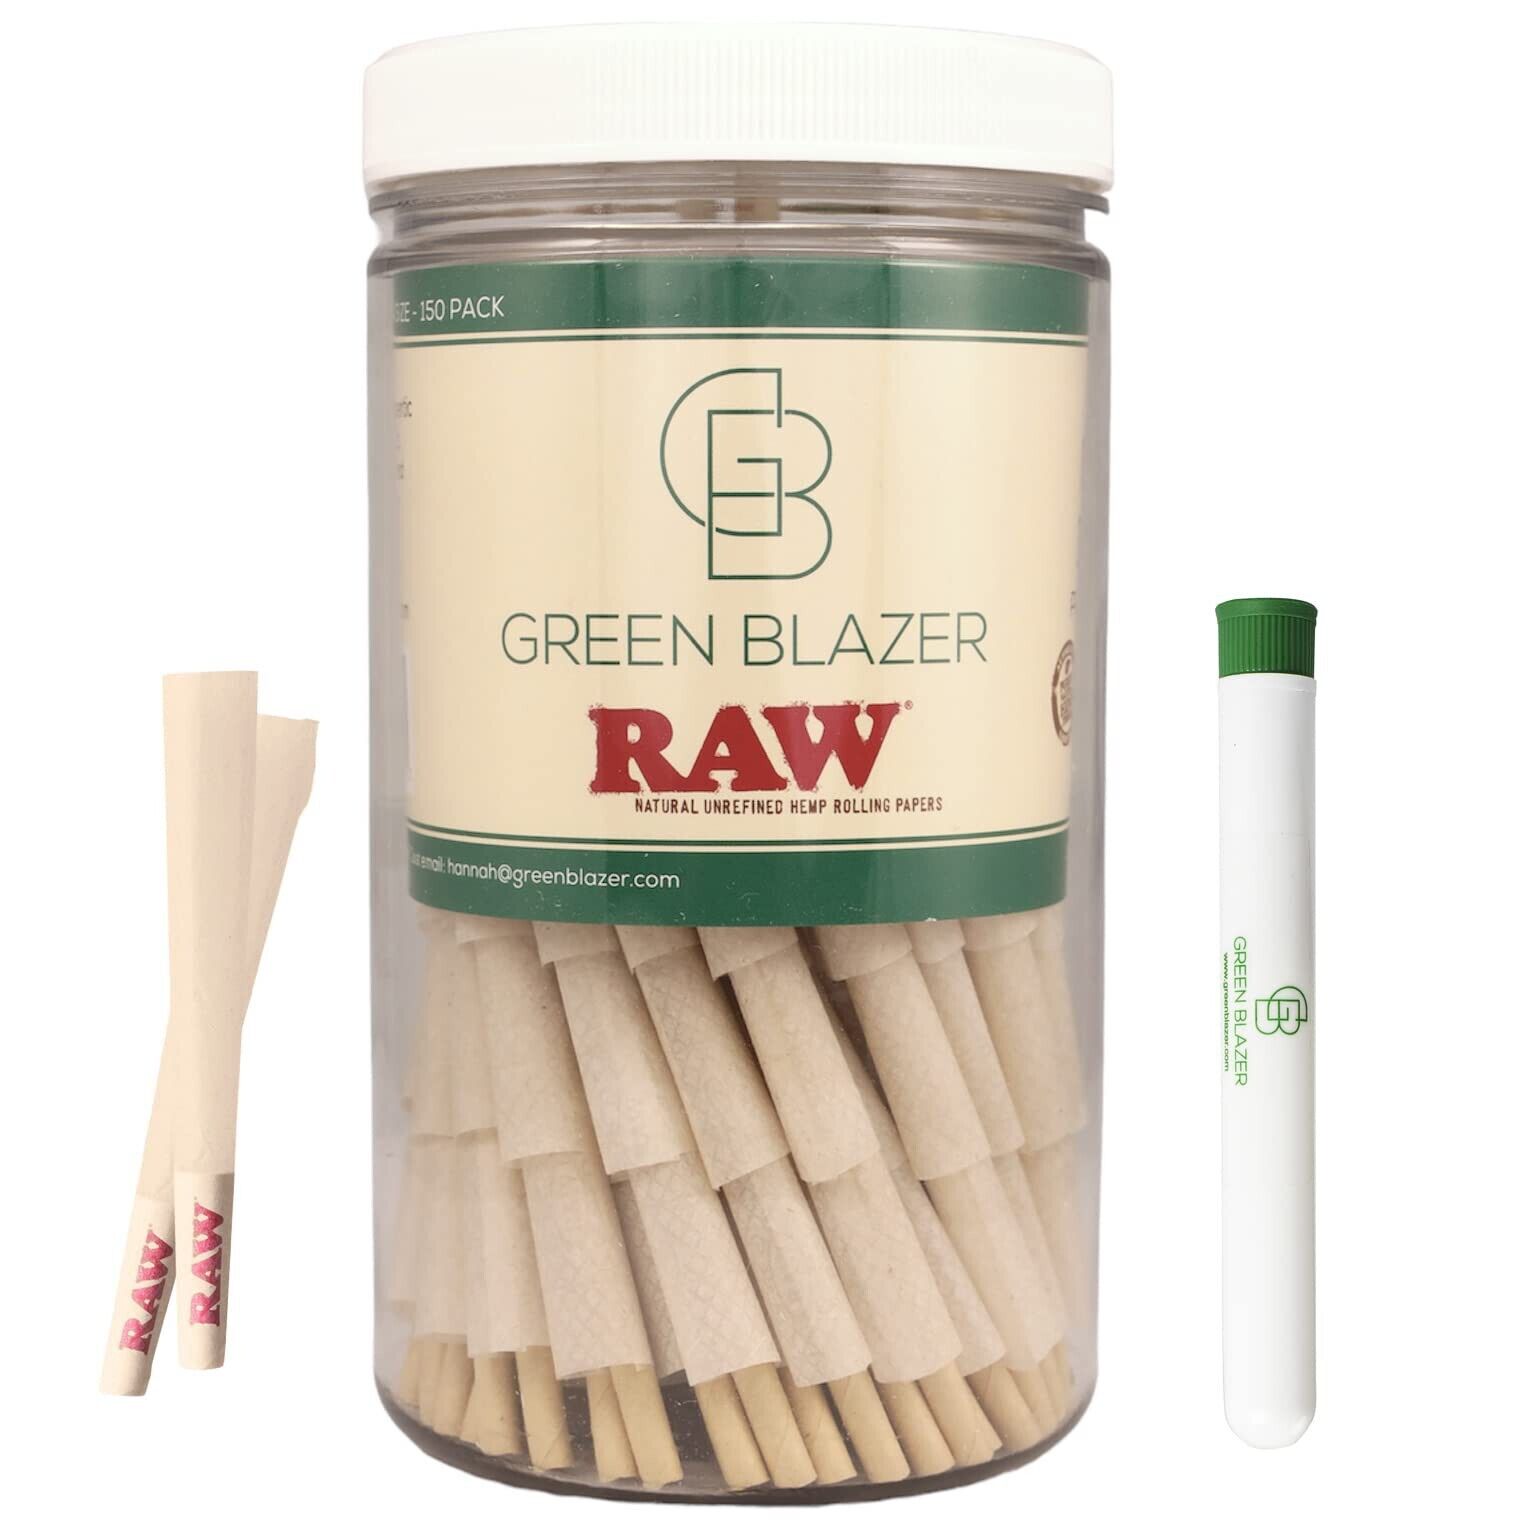 RAW Cones Organic 1 1/4 Size: 150 Pack